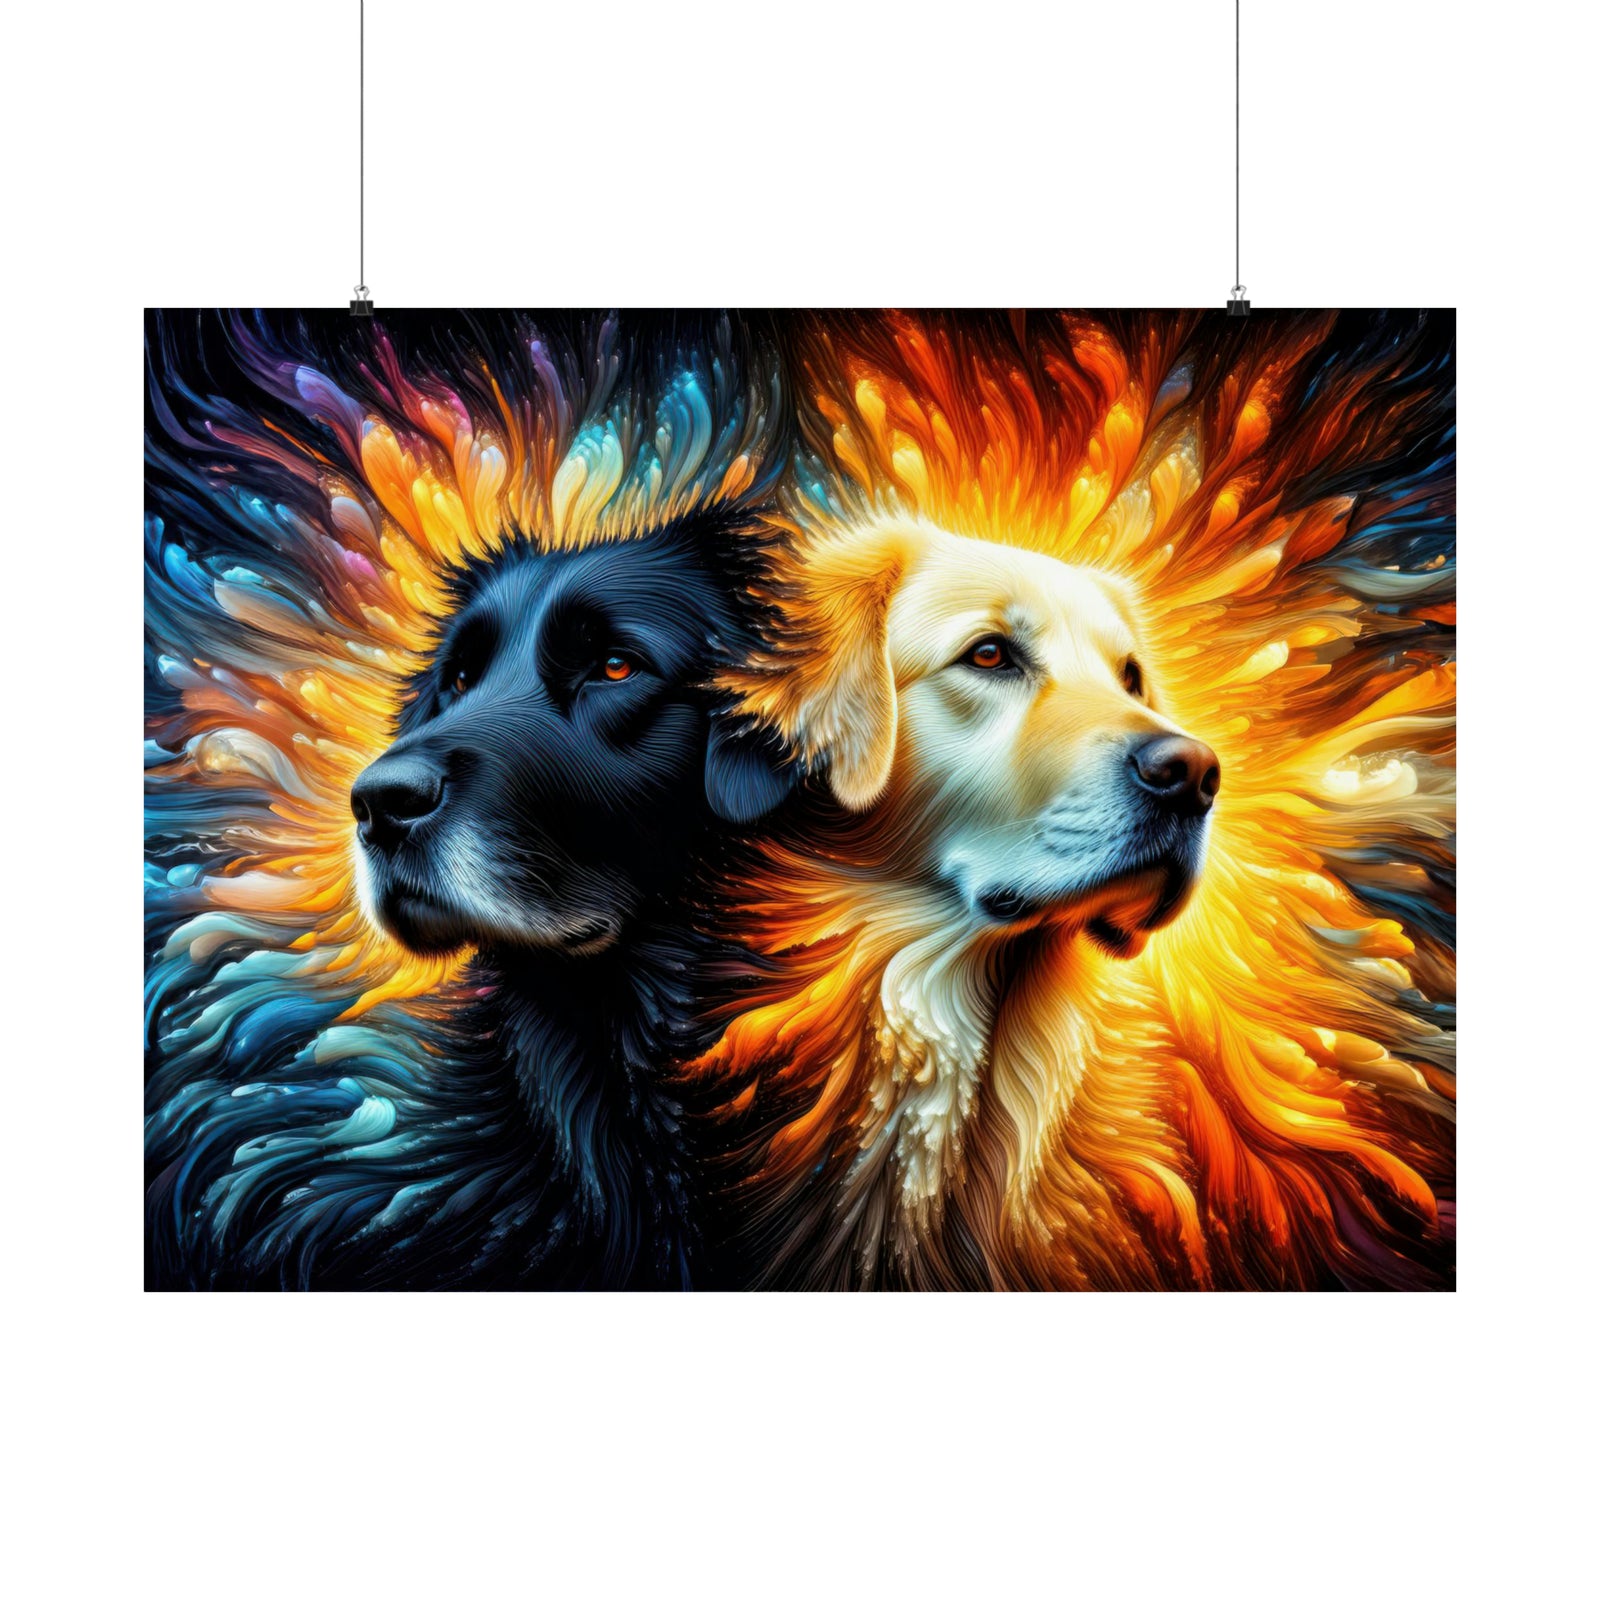 A Canine Duality Poster